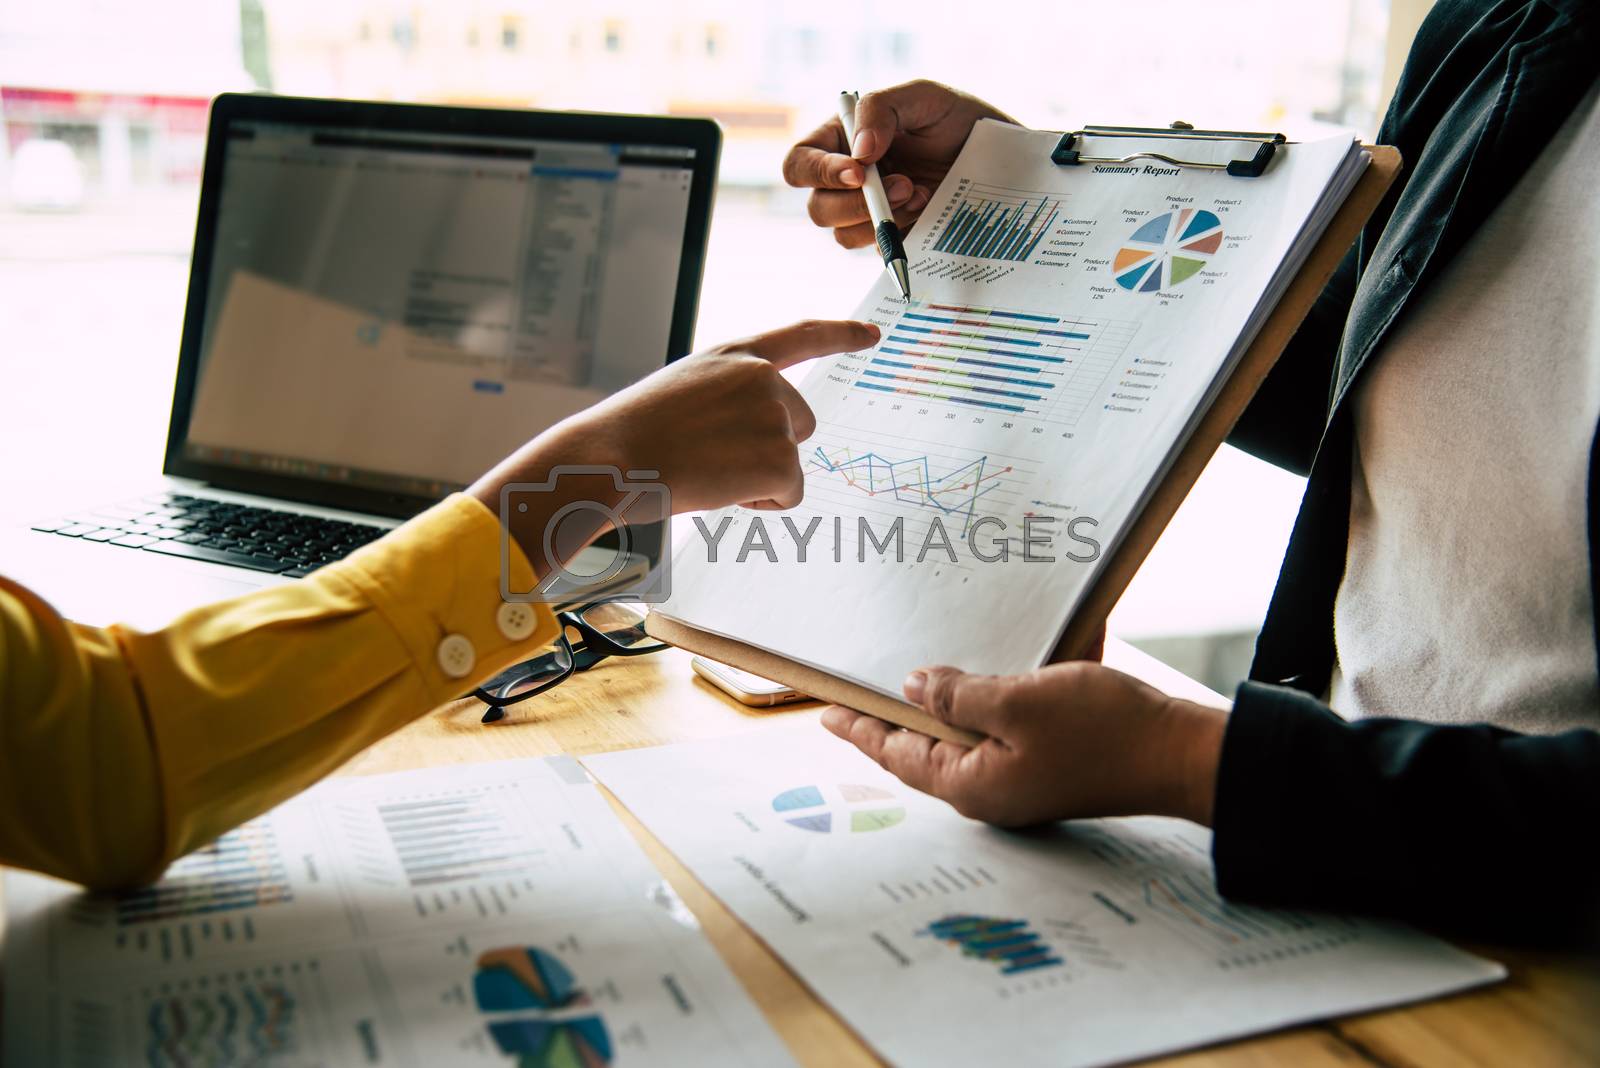 Royalty free image of Business team is working on accounting documents and team work t by photobyphotoboy